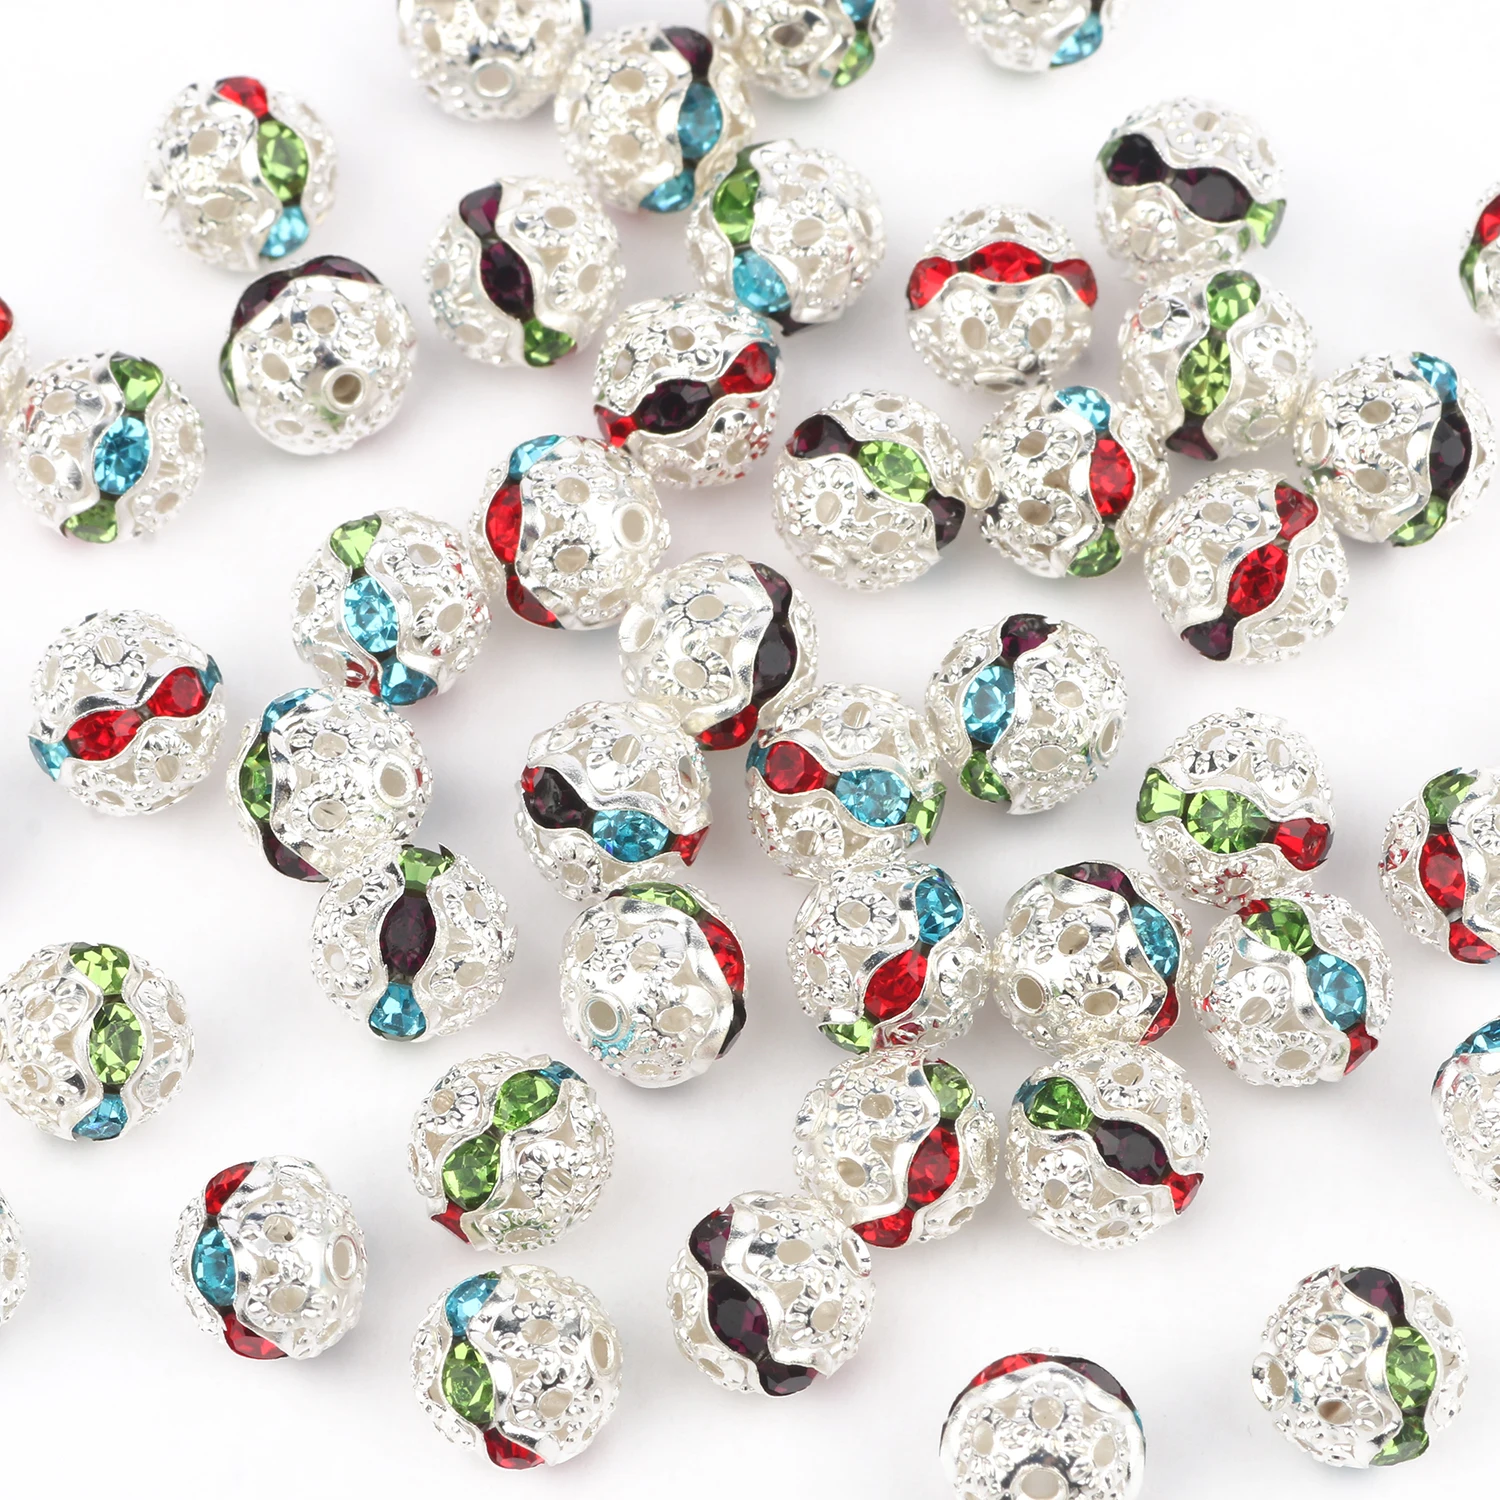 

50pcs Multicolor AB Rhinestone Balls Crystal Loose Spacer Round Beads for Jewelry Making DIY Bracelet Accessories 6/8mm